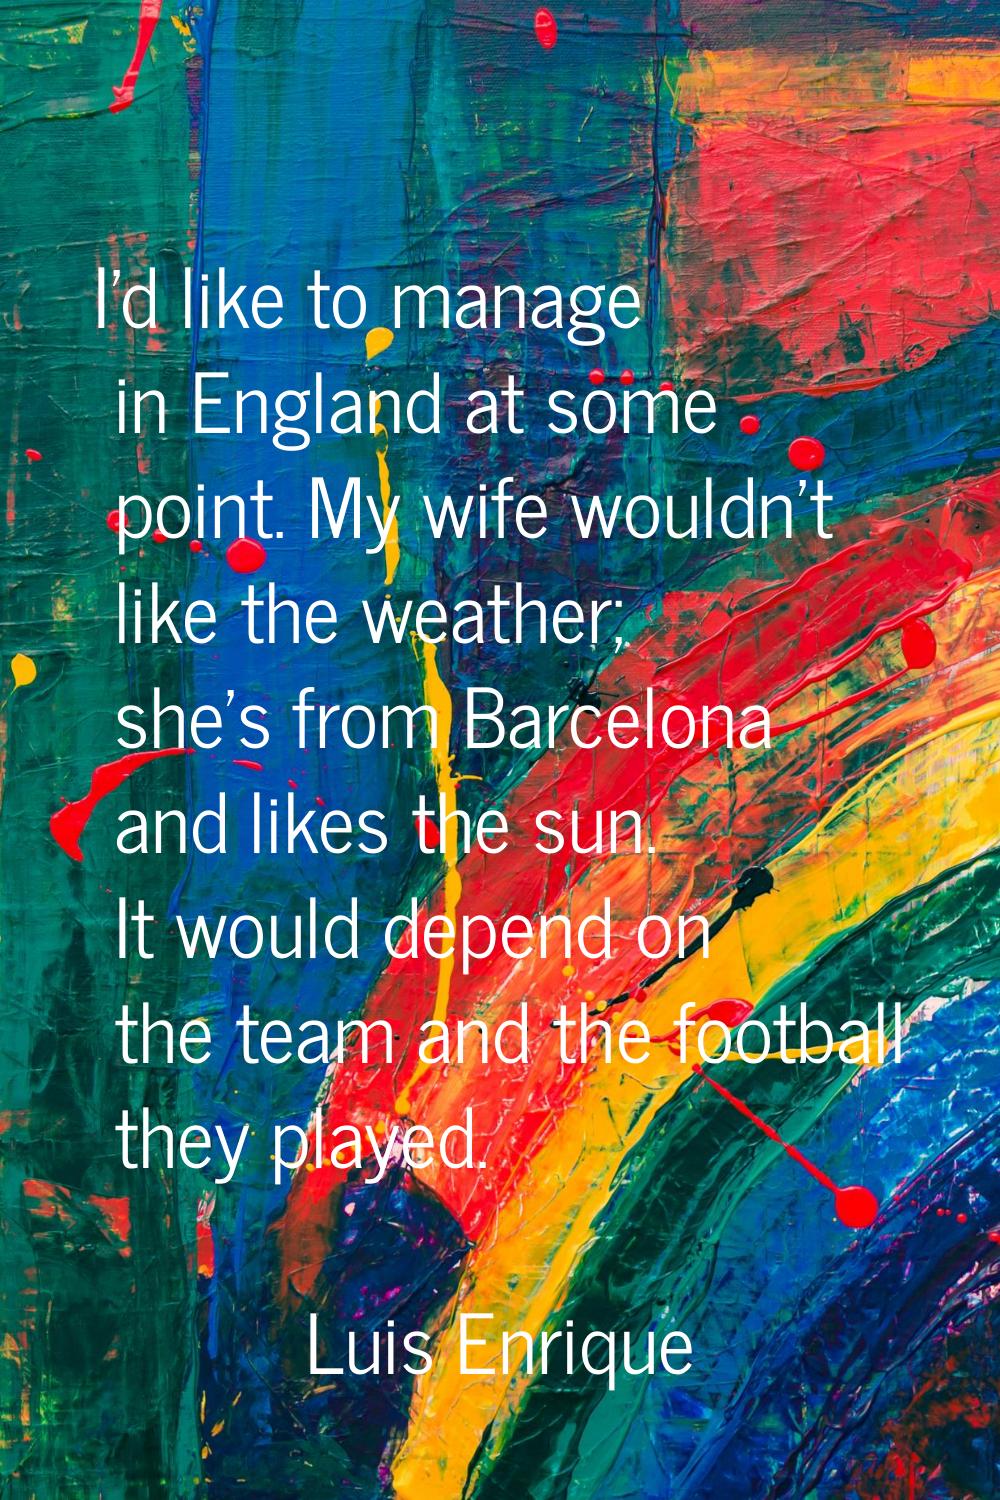 I'd like to manage in England at some point. My wife wouldn't like the weather; she's from Barcelon